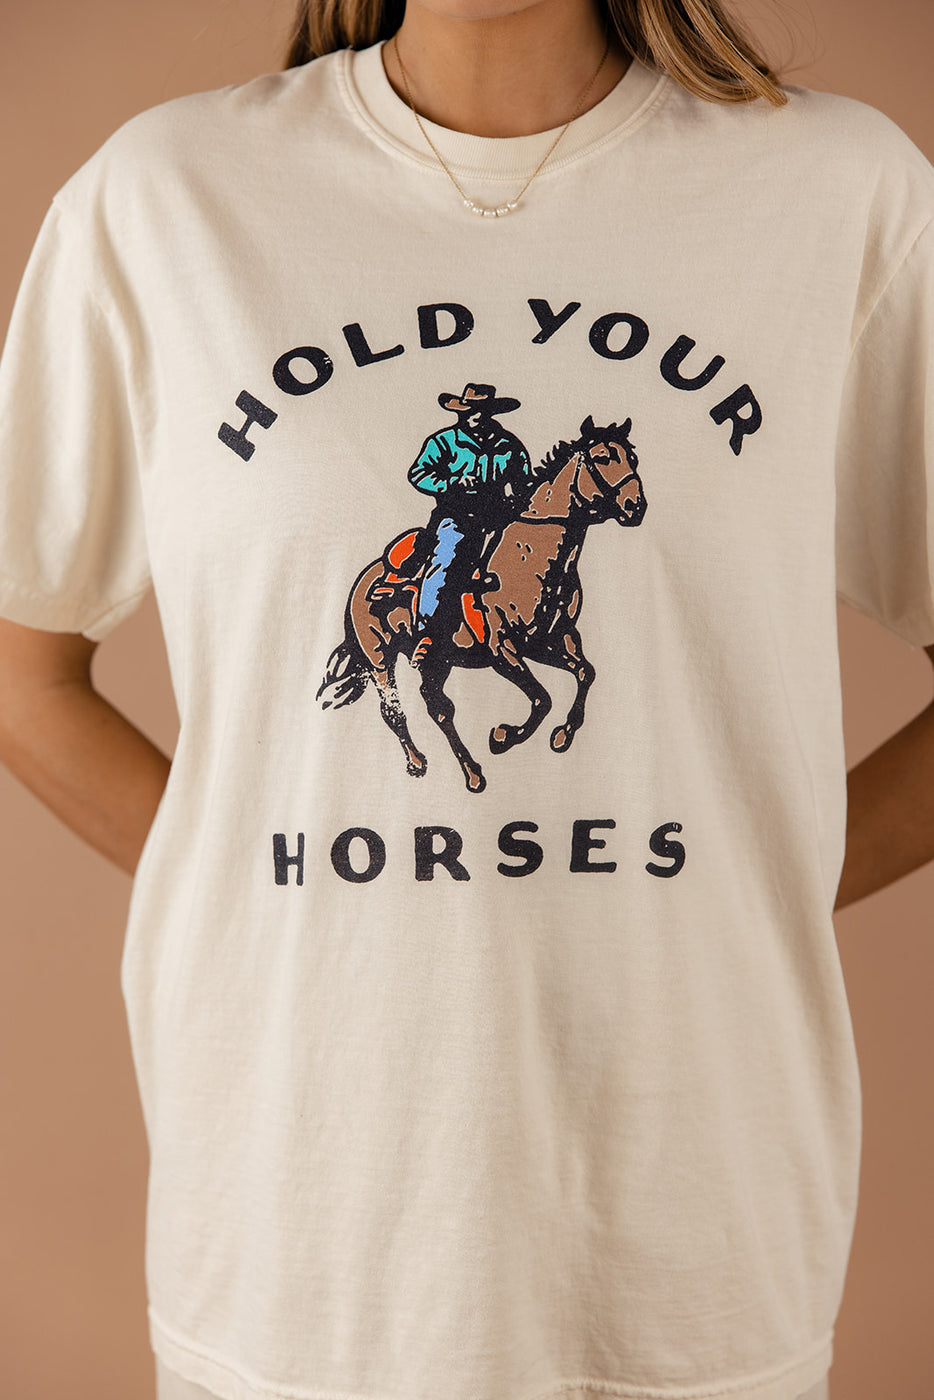 a person wearing a white shirt with a cowboy on a horse